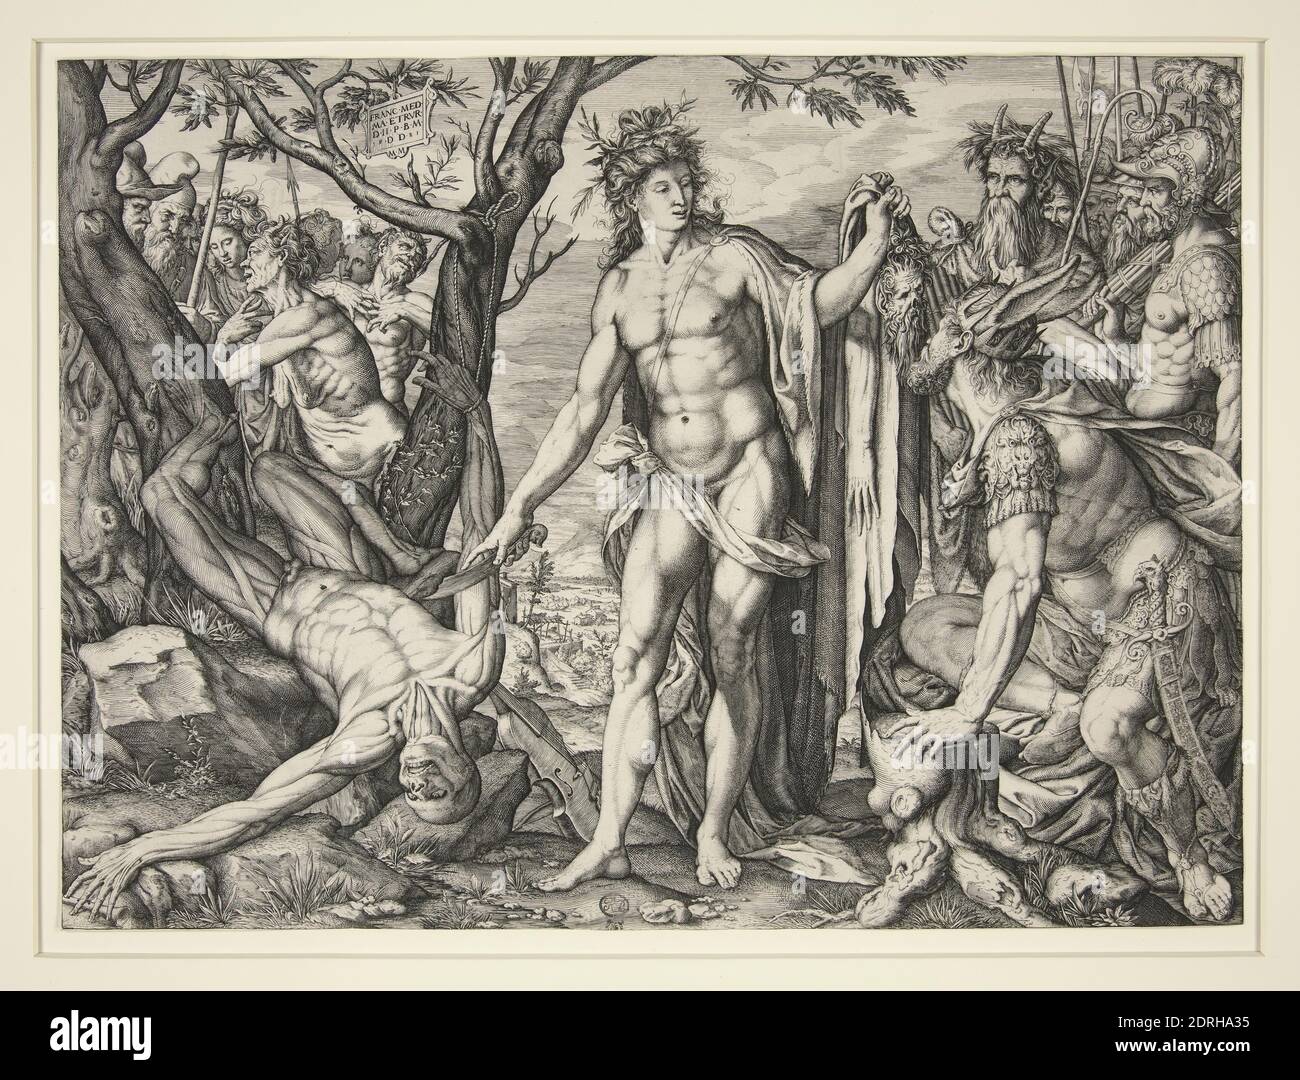 Artist: Melchior Meier, German, ac. Tuscany, ac. ca. 1572-1582, The Flaying of Marsyas, Engraving, sheet: 22.9 × 31.1 cm (9 × 12 1/4 in.), Made in Germany, German, 16th century, Works on Paper - Prints Stock Photo